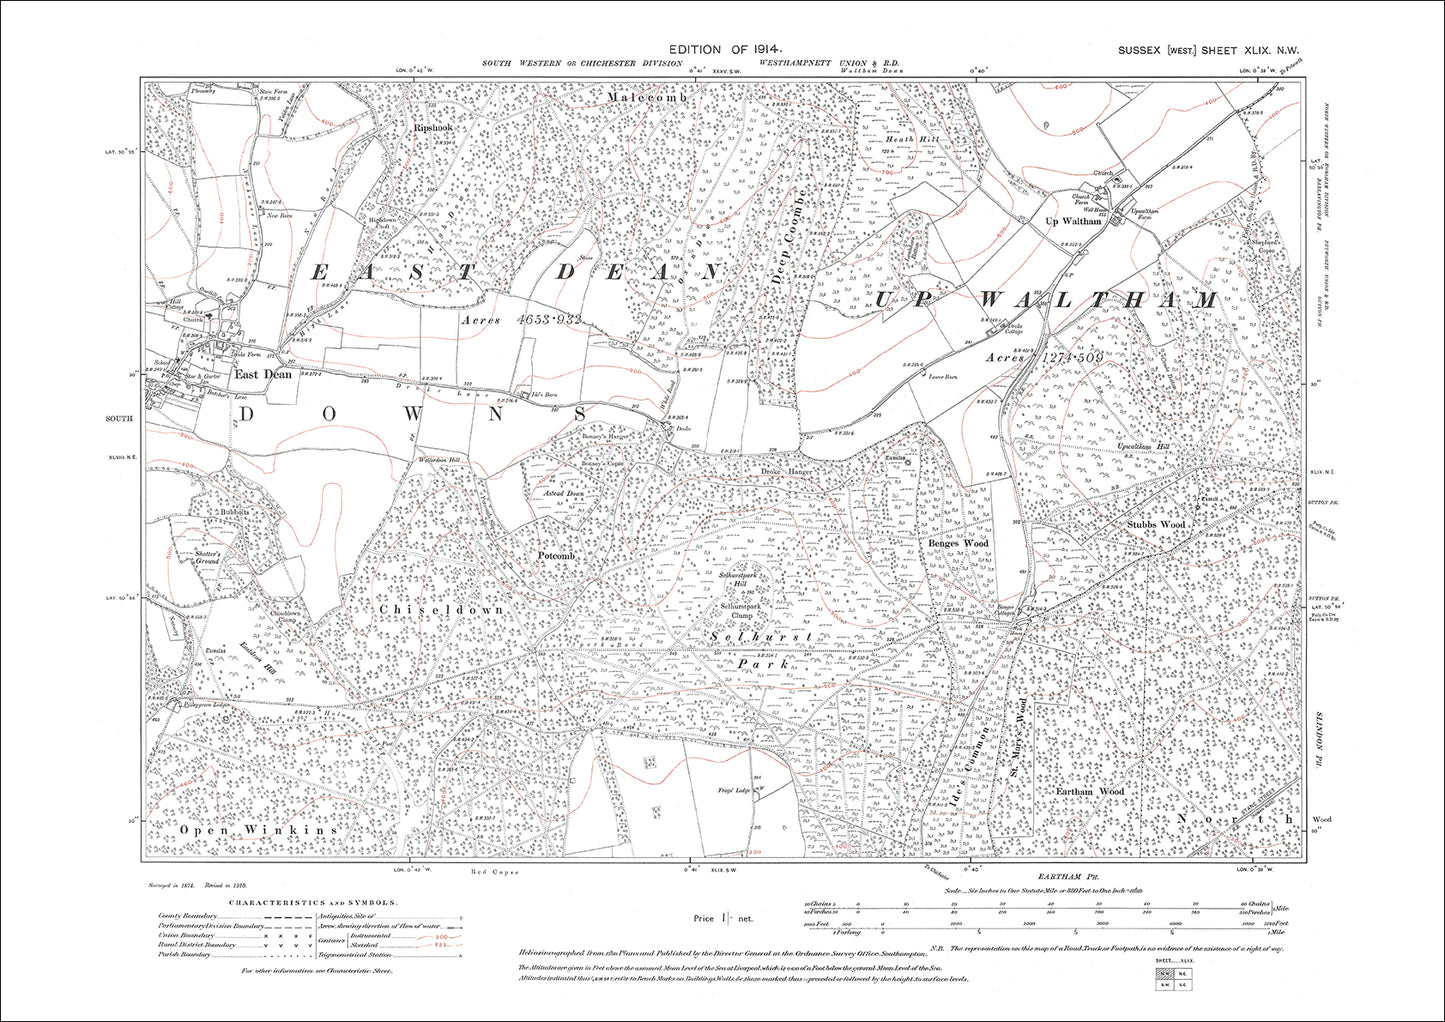 East Dean, Up Waltham, Selhurst Park, old map Sussex 1914: 49NW